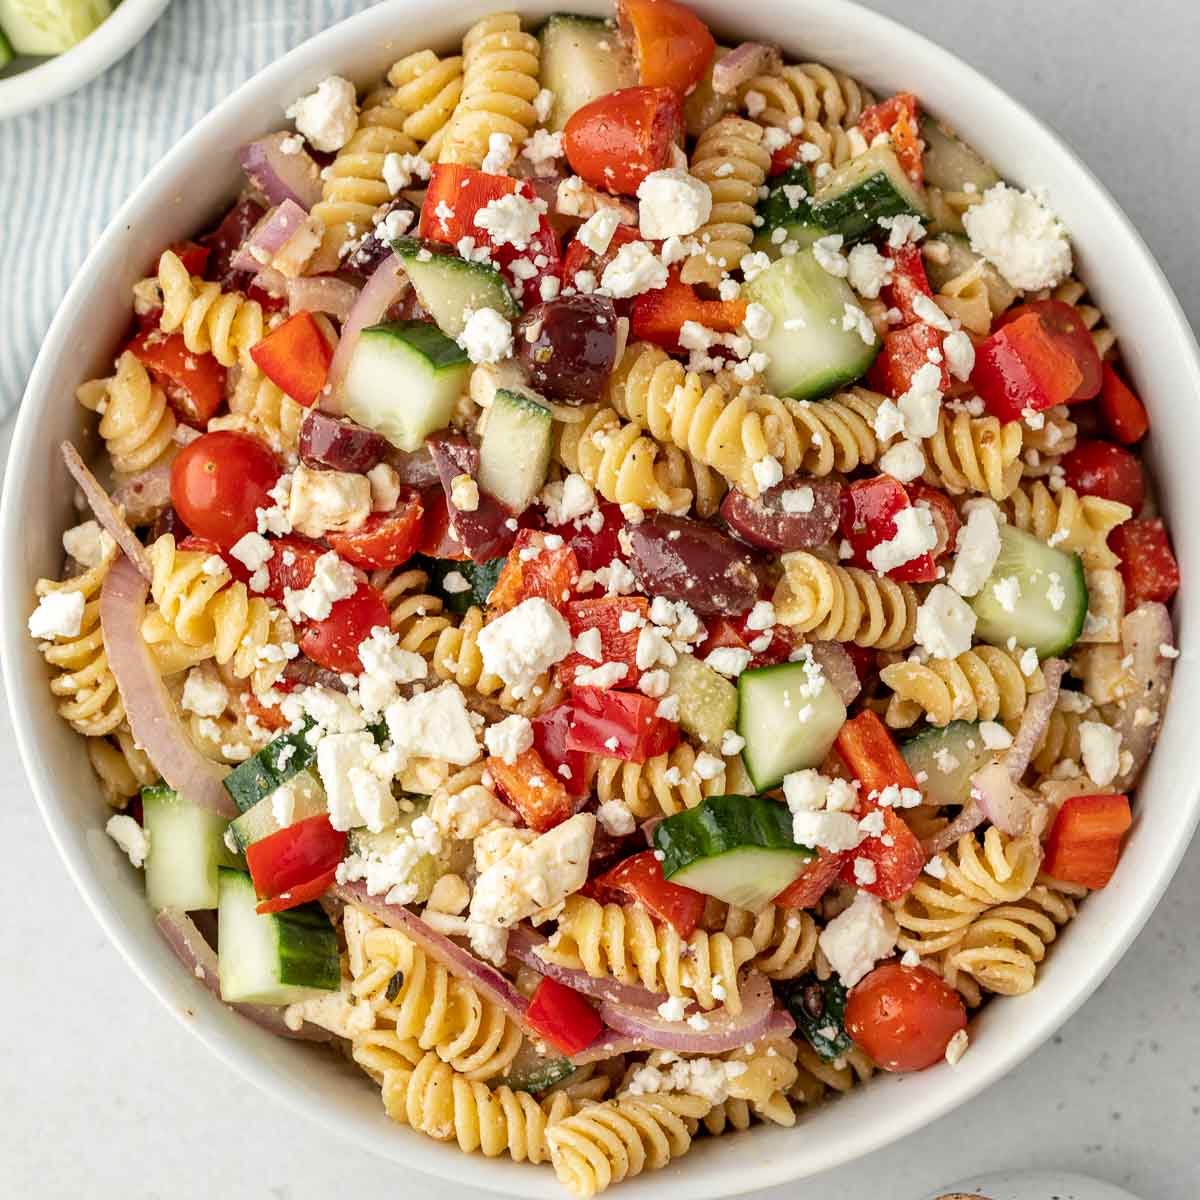 Pasta salad in a white bowl ready to be served.